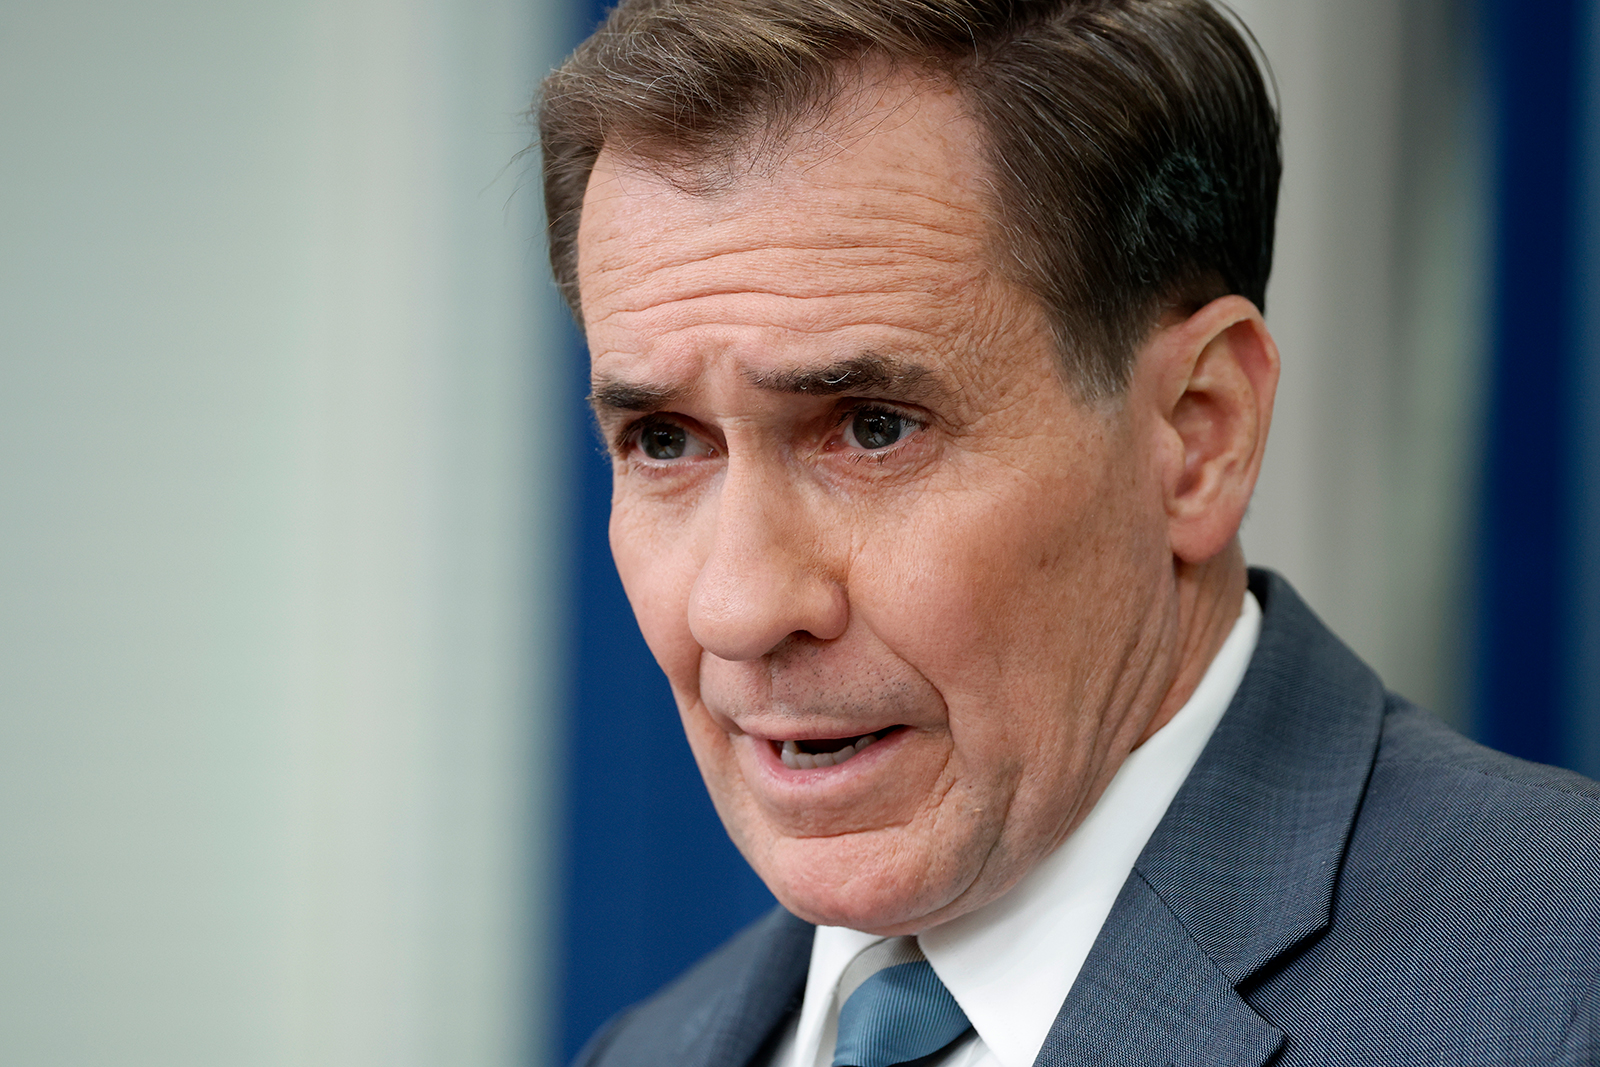 John Kirby attends a news briefing at the White House in Washington on March 22.